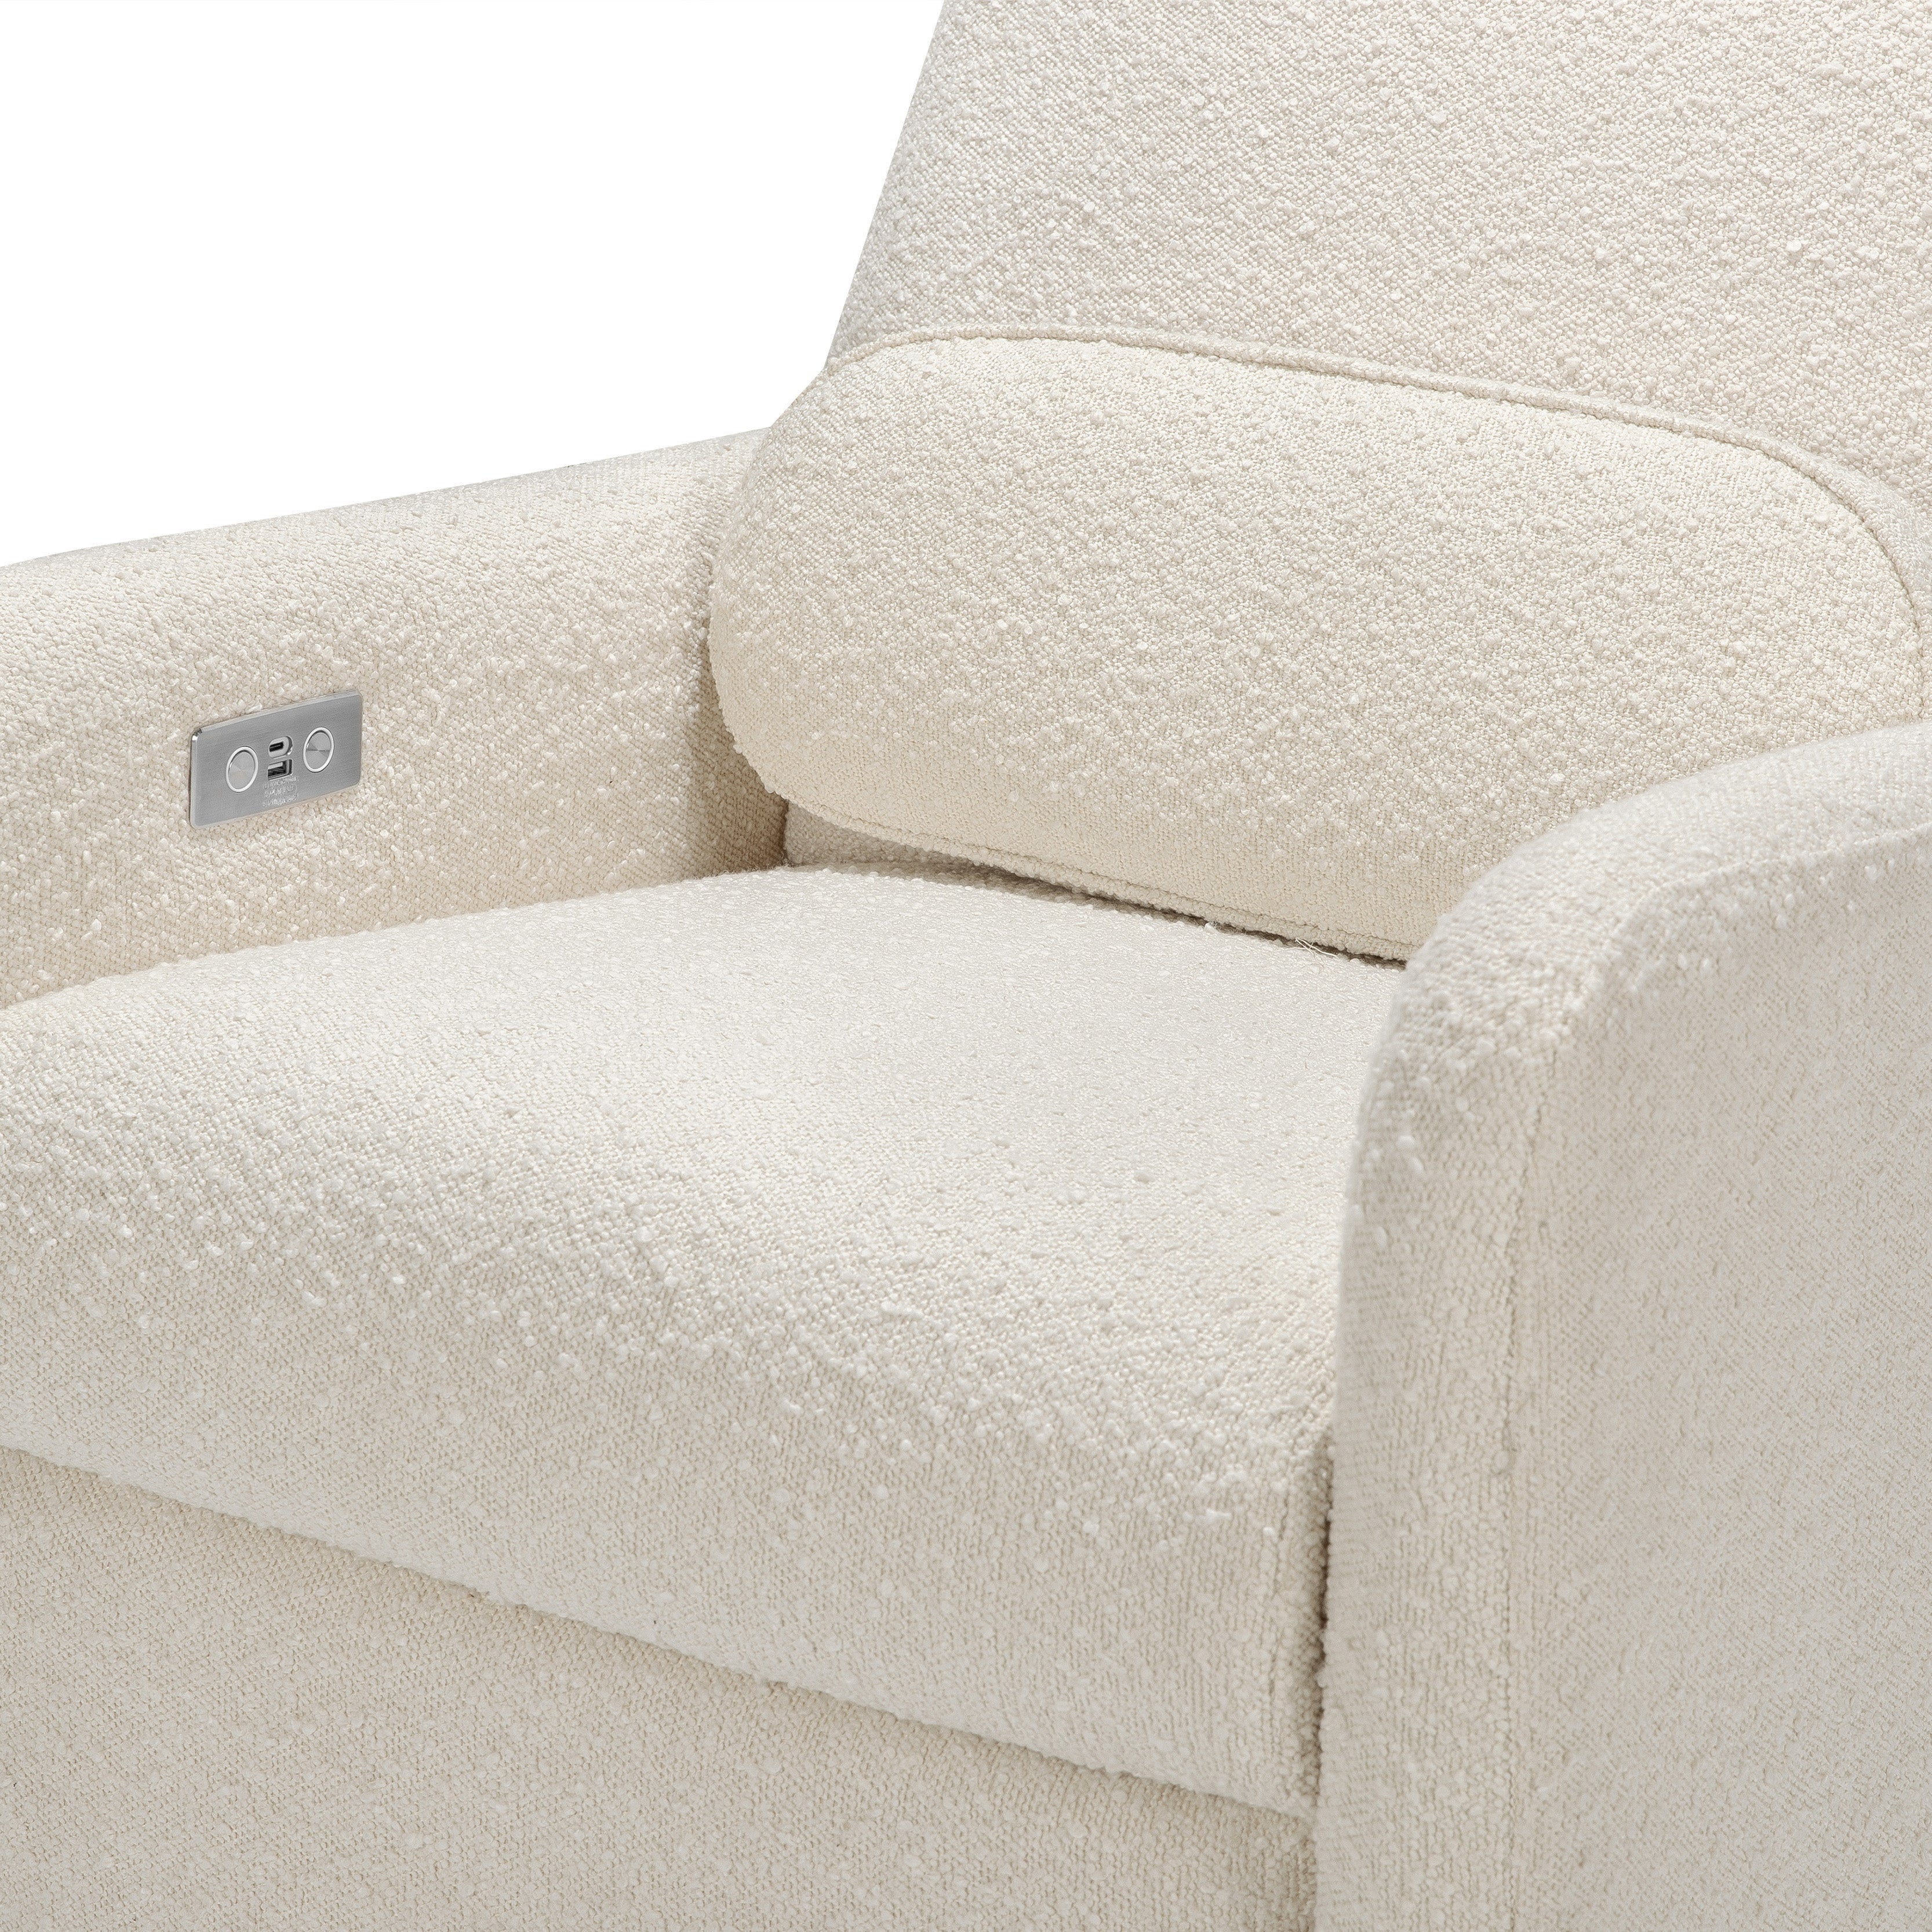 Ubabub Arc Electronic Recliner and Swivel Glider in Boucle with USB Port